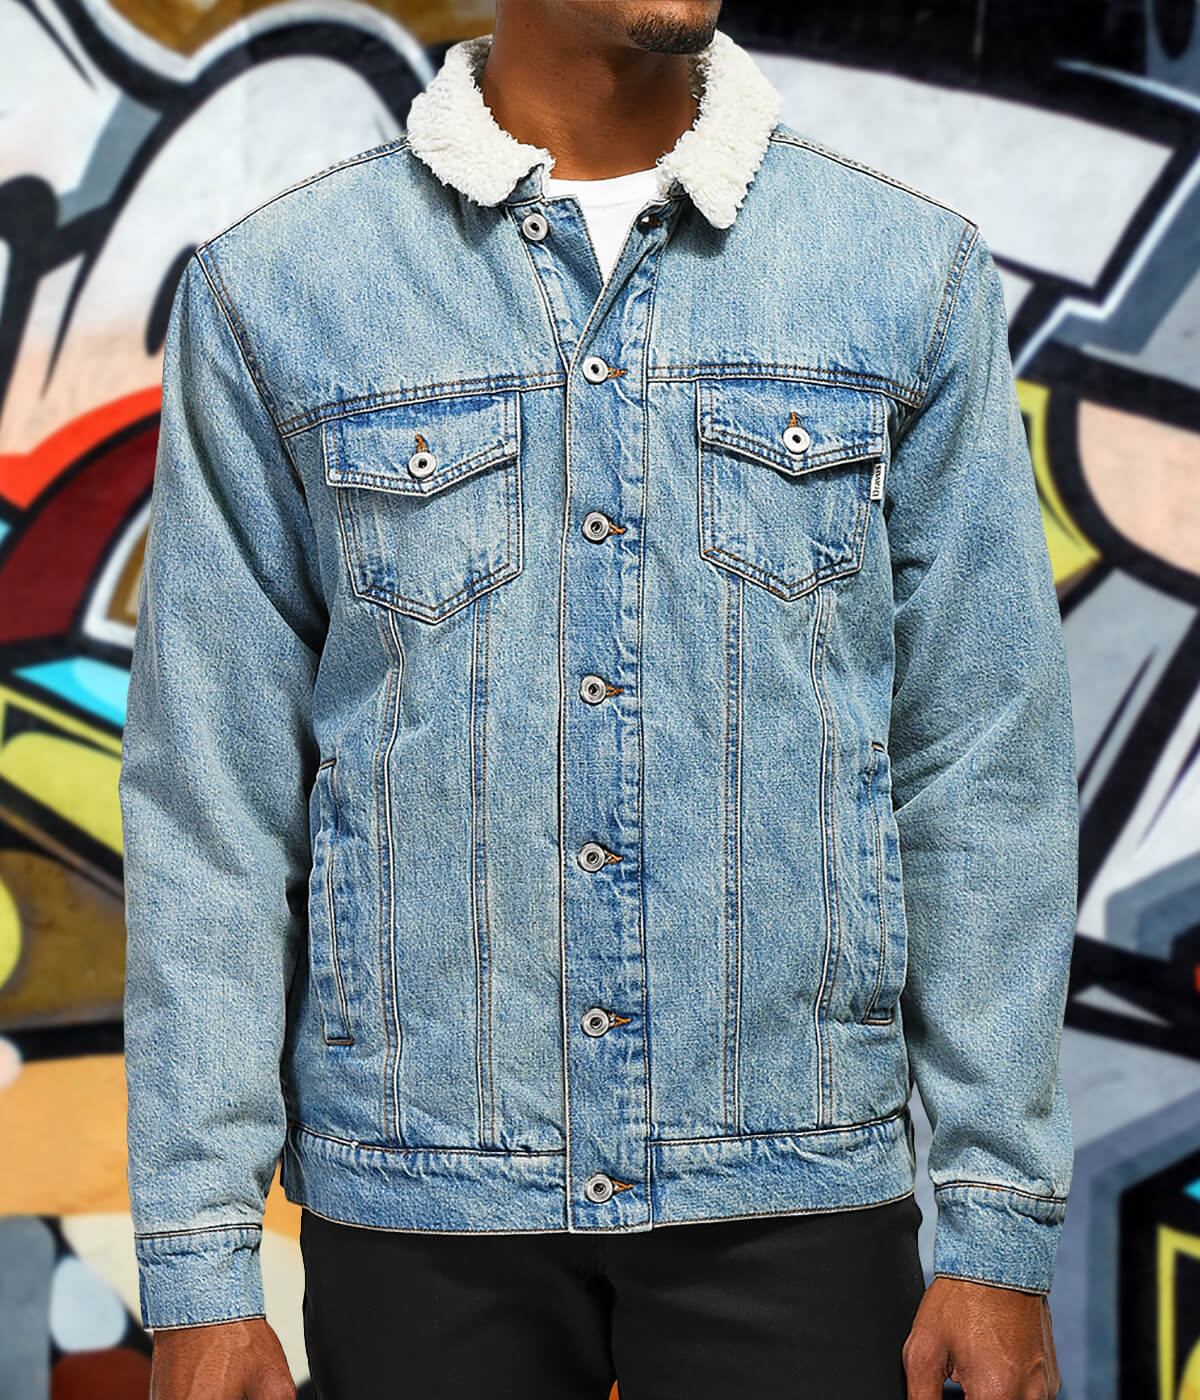 MEN'S NEW ARRIVAL JACKETS FROM DRAVUS AND MORE - SHOP NOW